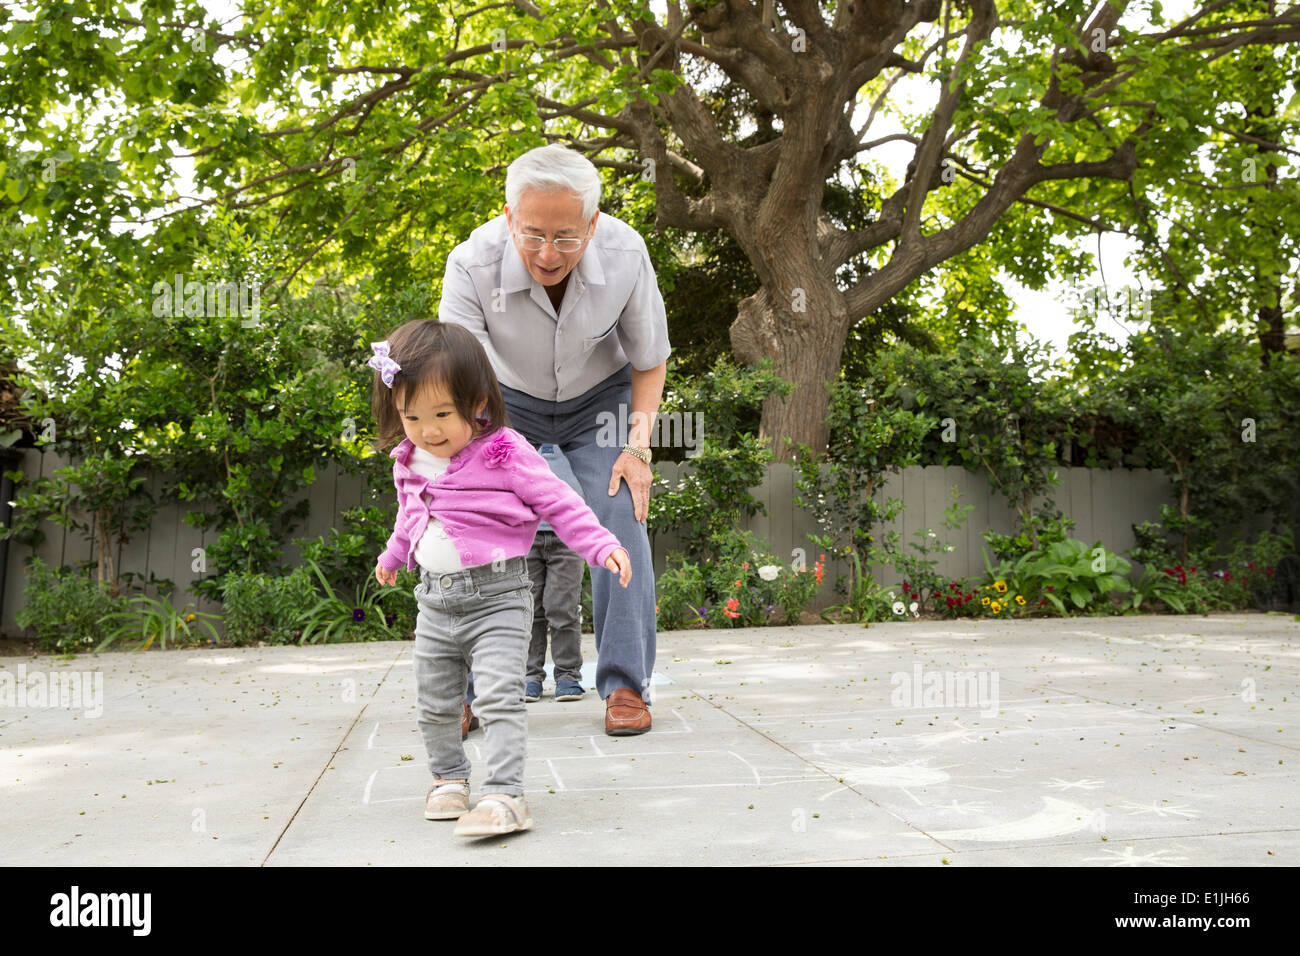 Grandfather playing hopscotch with toddler granddaughter Stock Photo